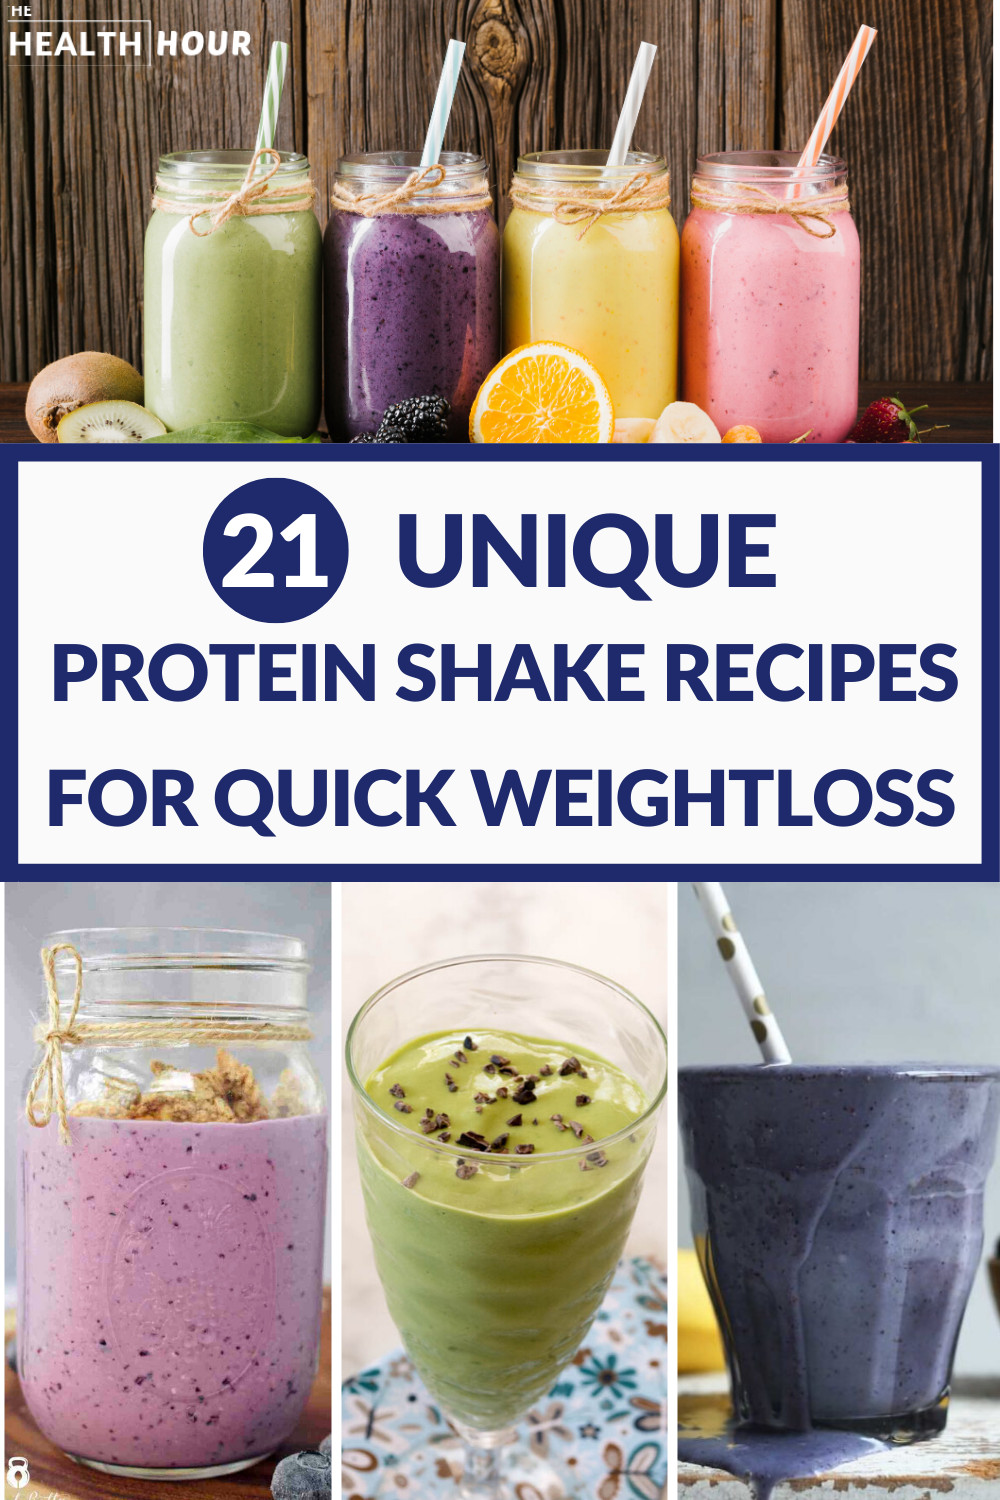 Low Carb Protein Shake Recipes For Weight Loss
 Protein shakes are a great way of losing weight healthily